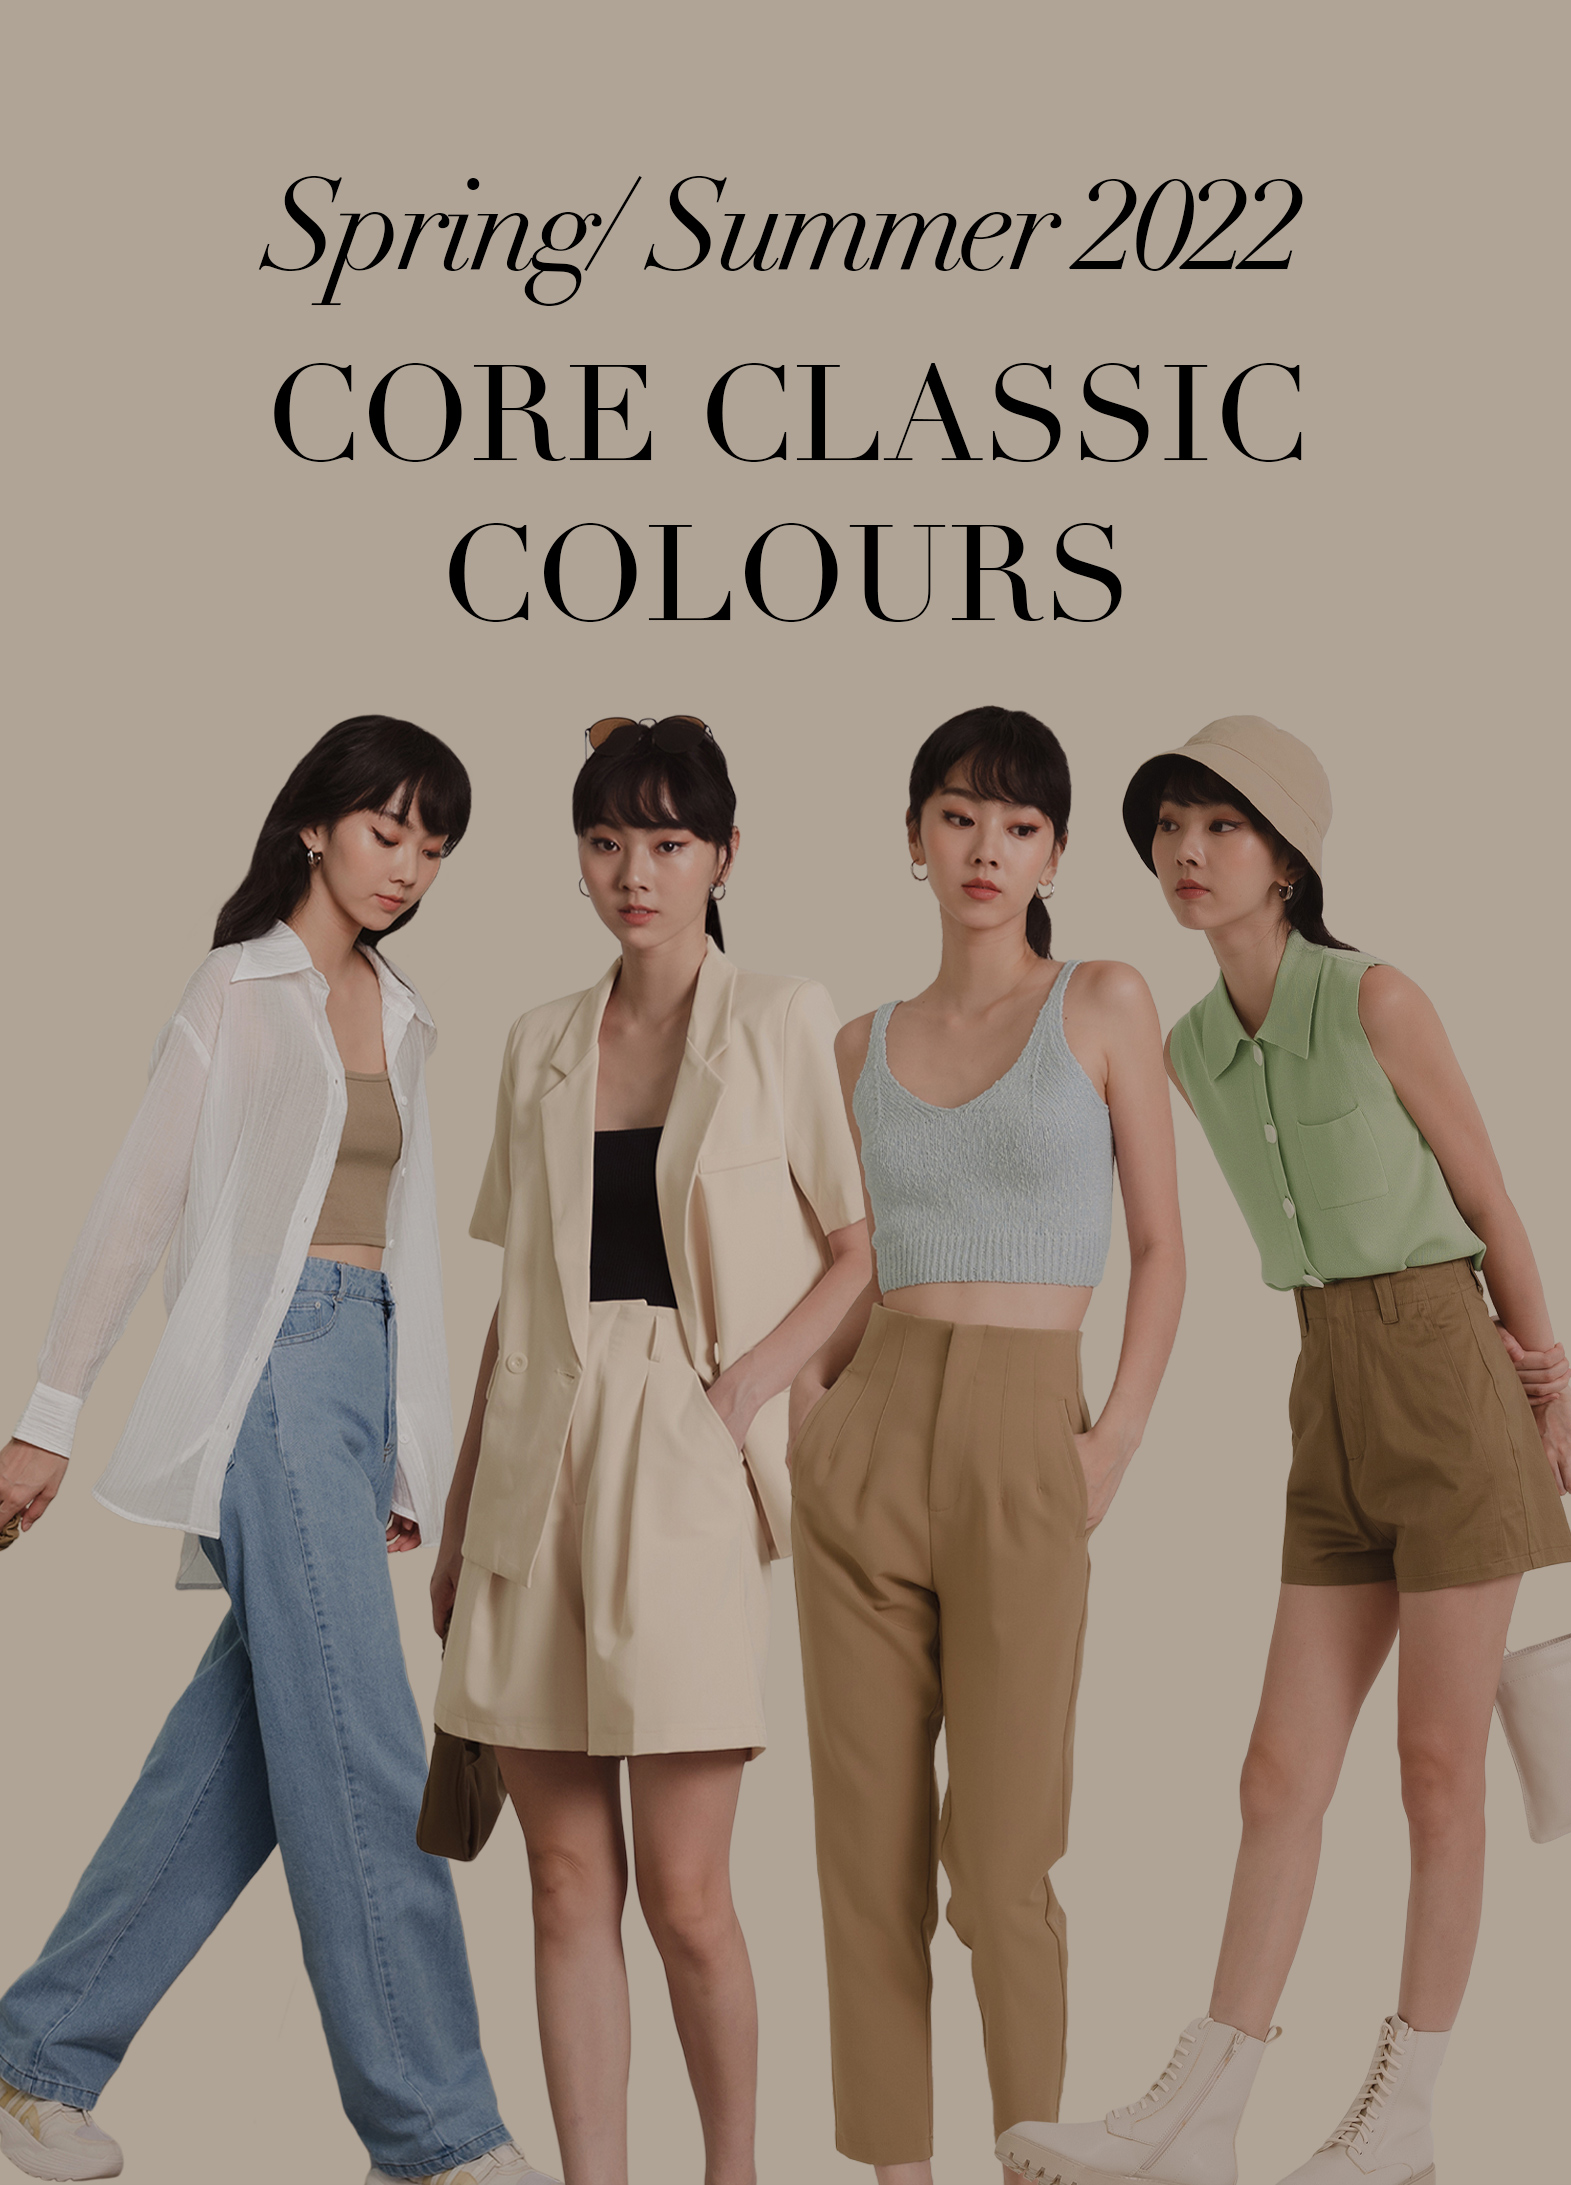 SPRING/SUMMER 2022 CORE CLASSIC COLOURS